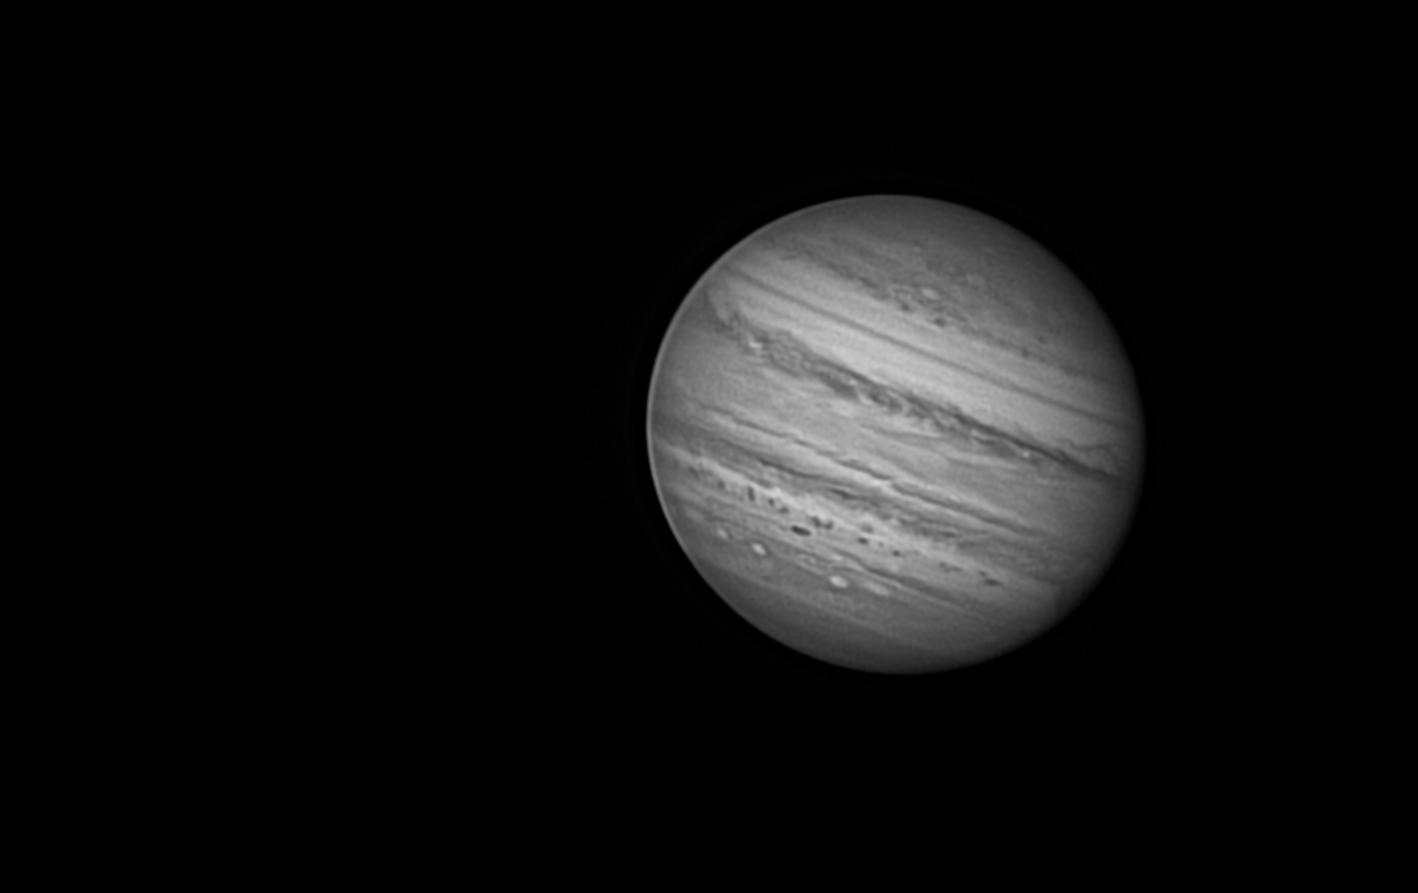 62e52ab66f043_2022-07-29-0322_5-Jupiter_lapl5_ap399_conva.png.8889a3b432f199e4eb0ecb75628a2bd3.png